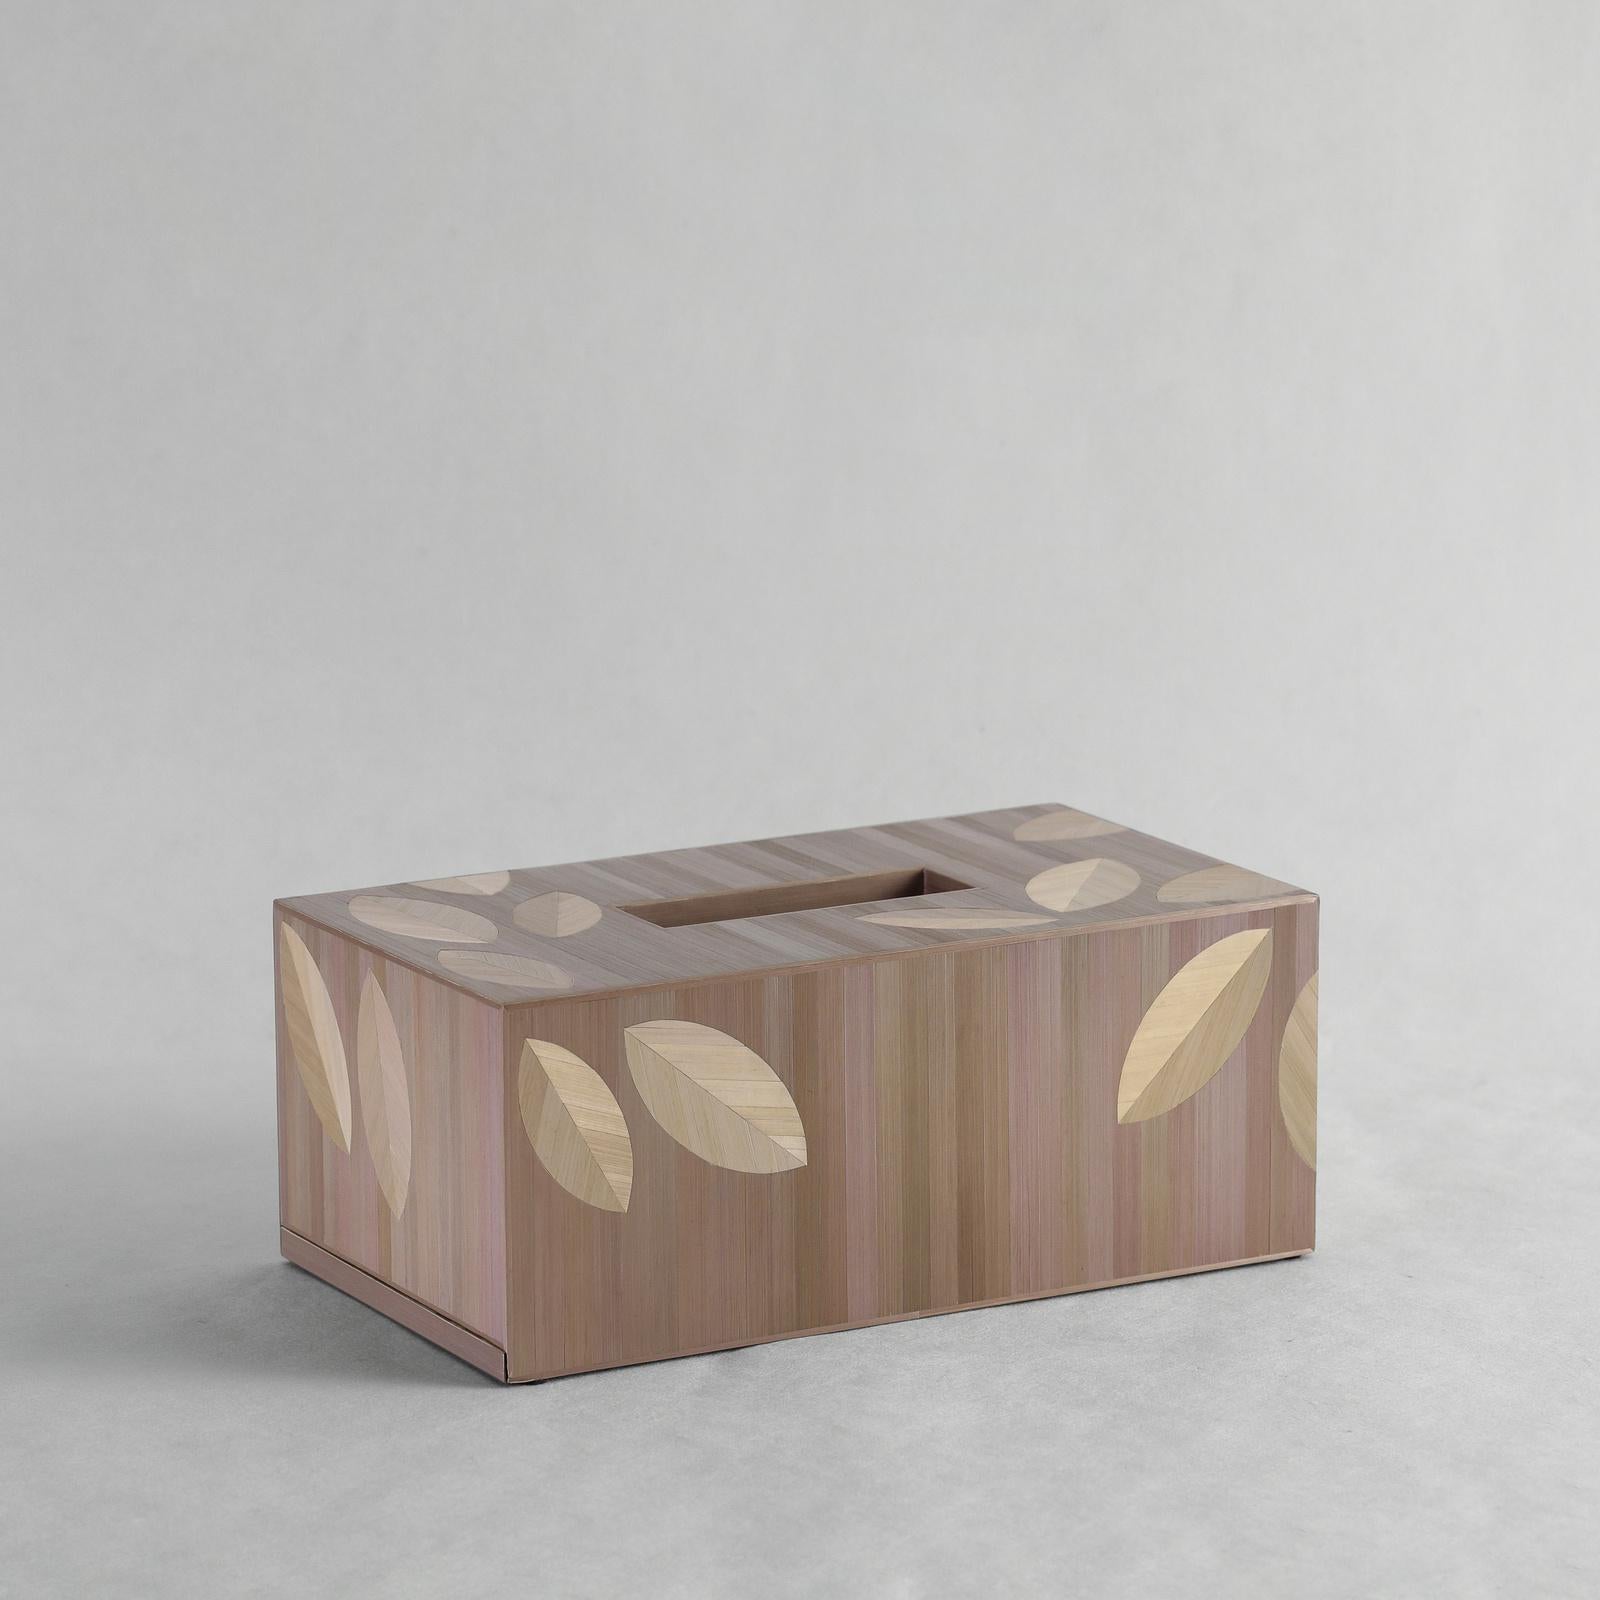 A tissue box of quiet beauty. Leaves falling in soft autumnal tones, every piece of straw marquetry applied by hand in our workshop with the most highly skilled artisans.